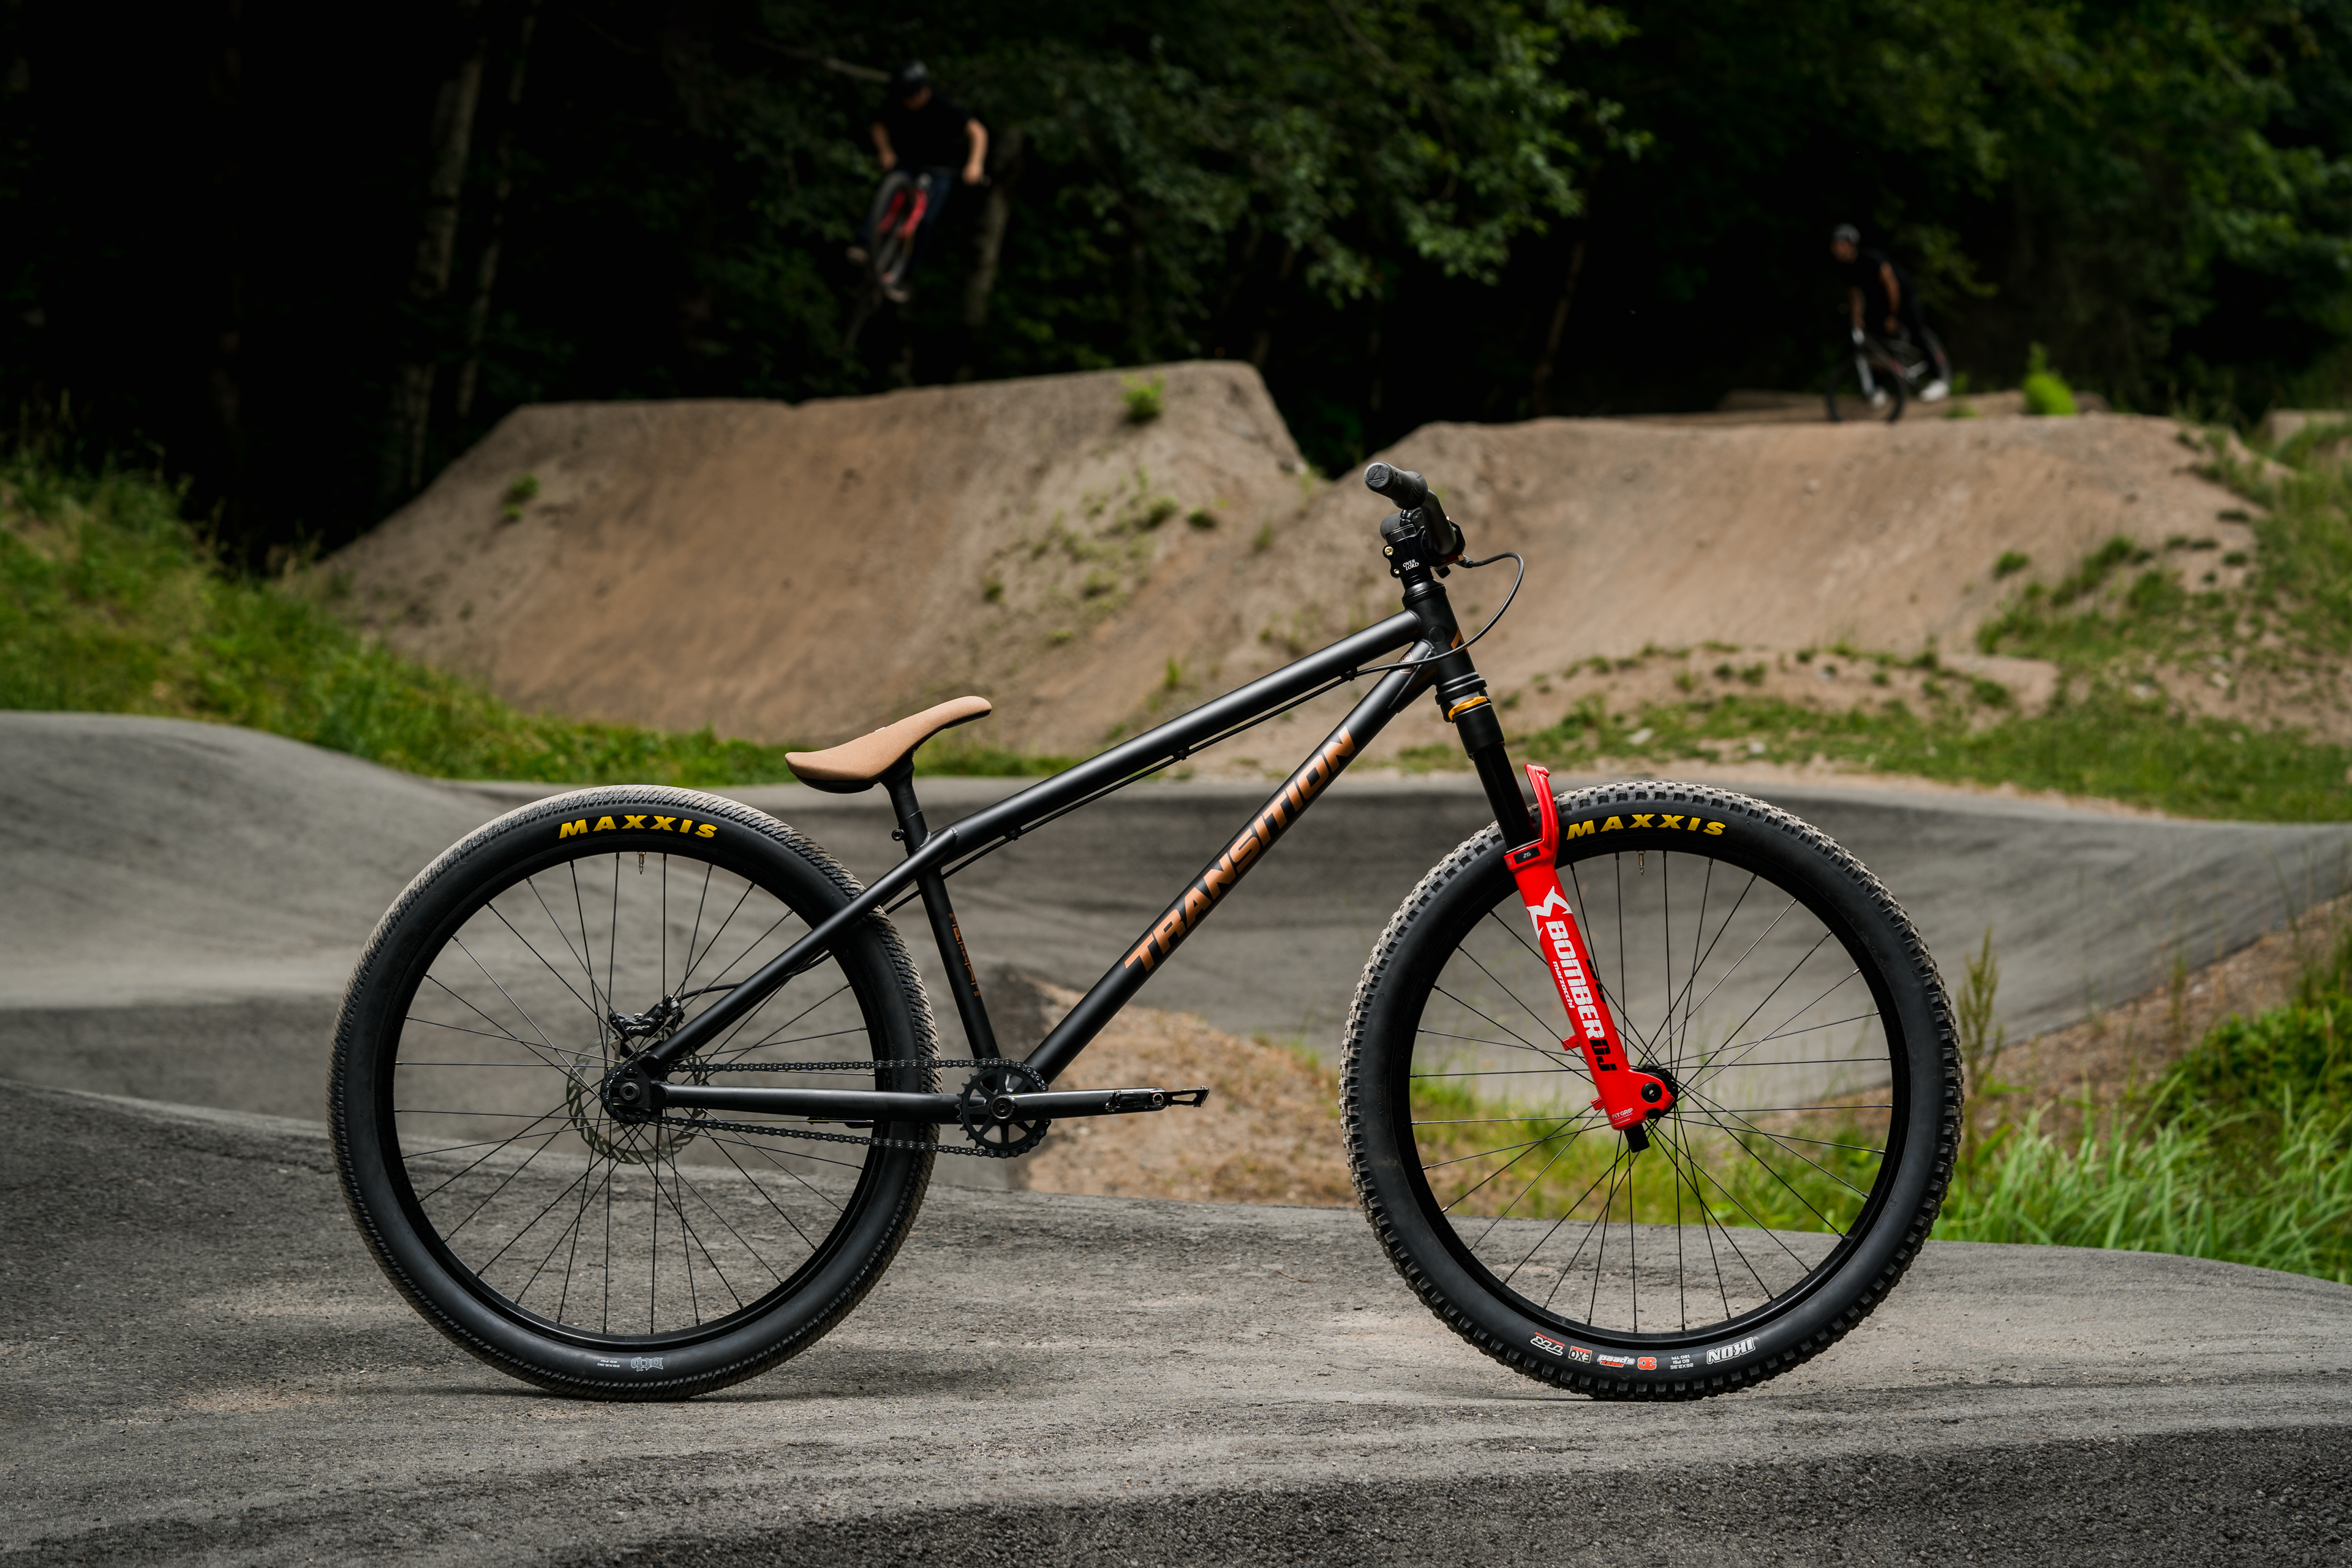 Transition PBJ bike in copper/black with red Marzocchi Bomber DJ shot by A.J. Barlas at the Squamish Casino pumptrack